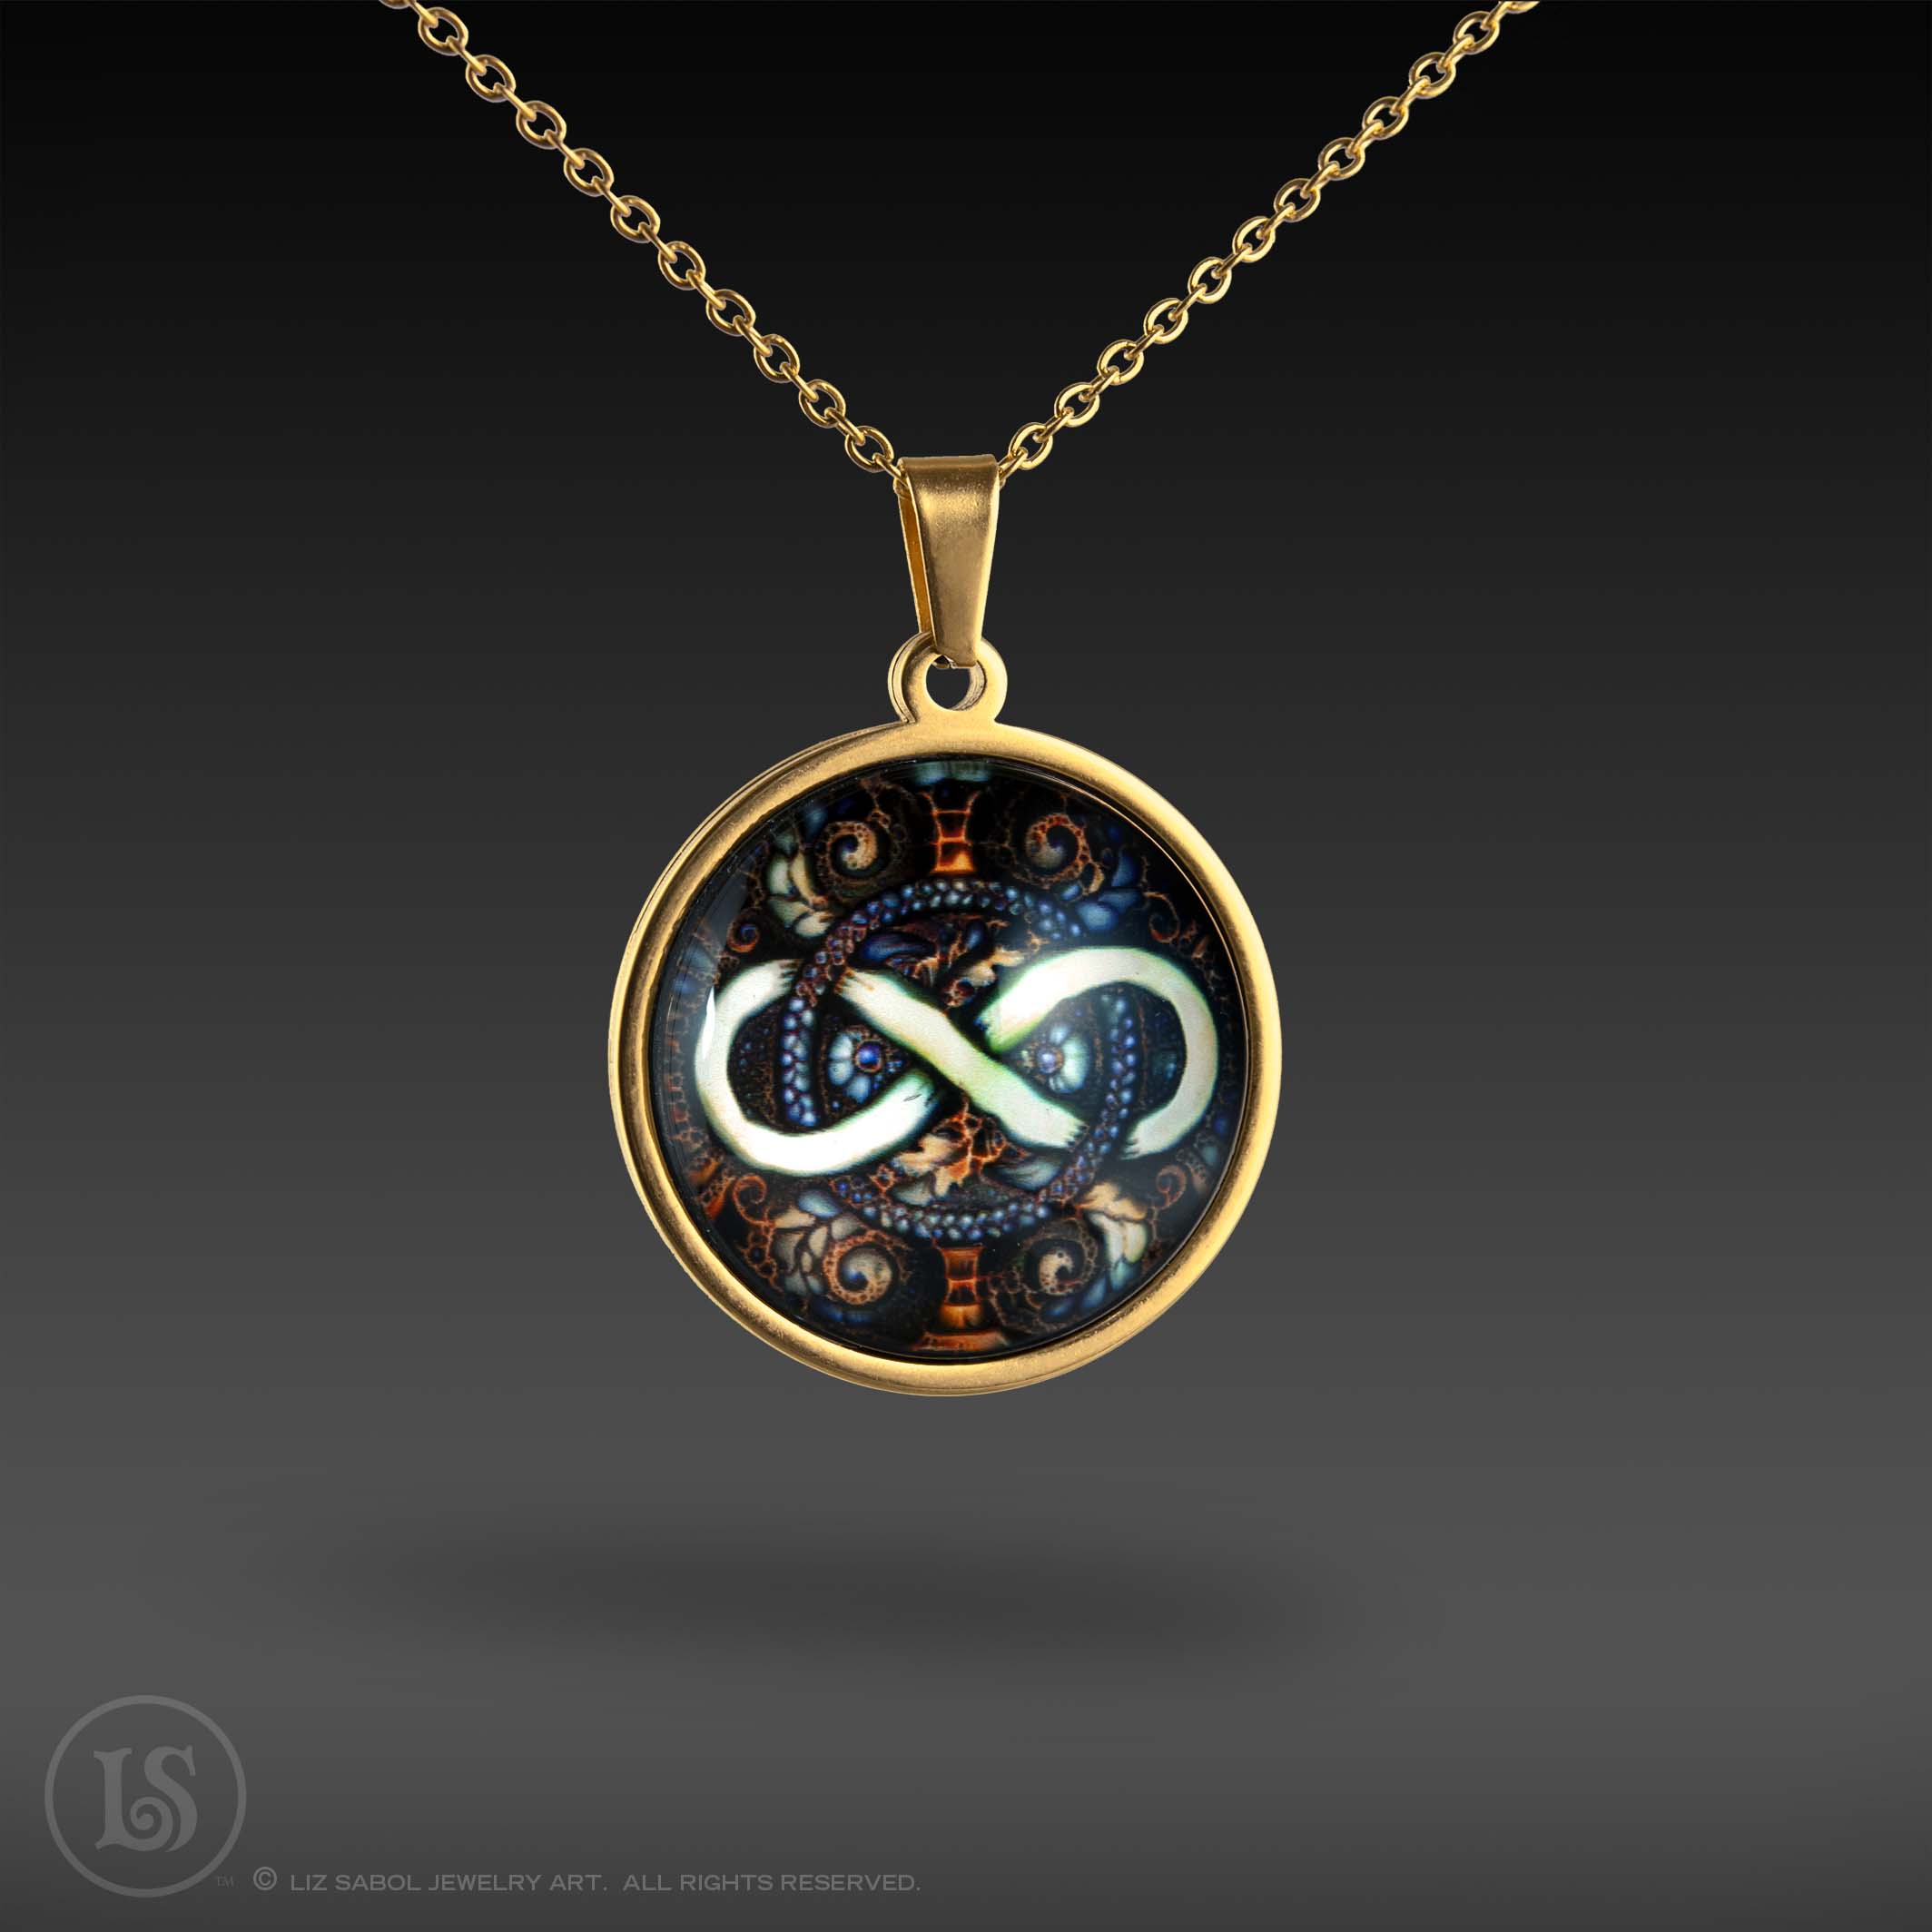 Vintage Dreams Infinity Pendant, Glass, Gold-plated Stainless Steel